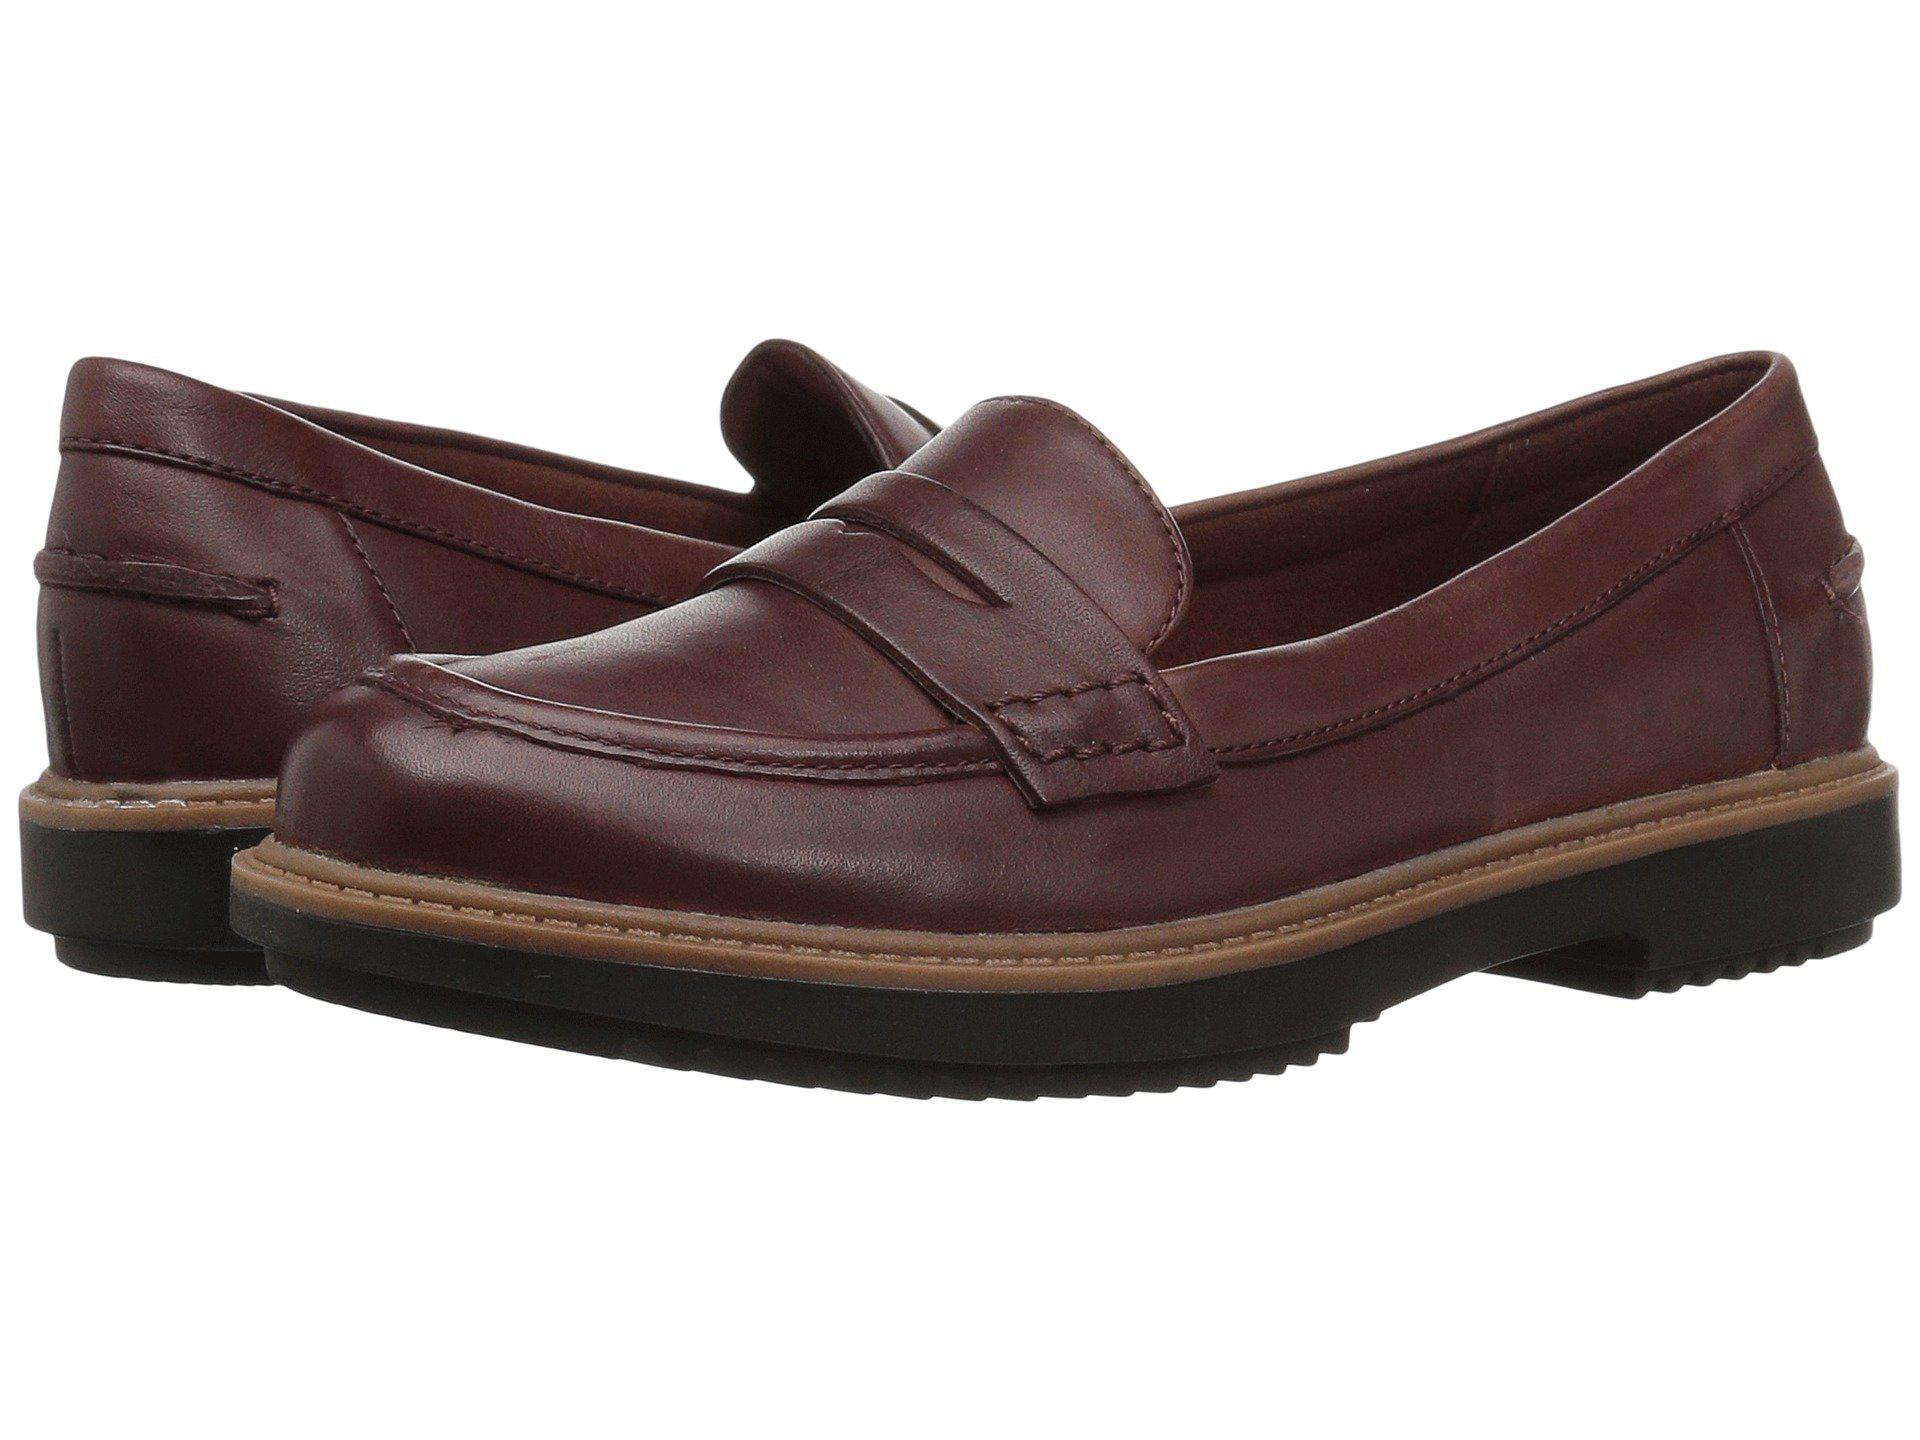 Clarks Leather Raisie Eletta Penny Loafer in Mahogany Leather (Brown) | Lyst